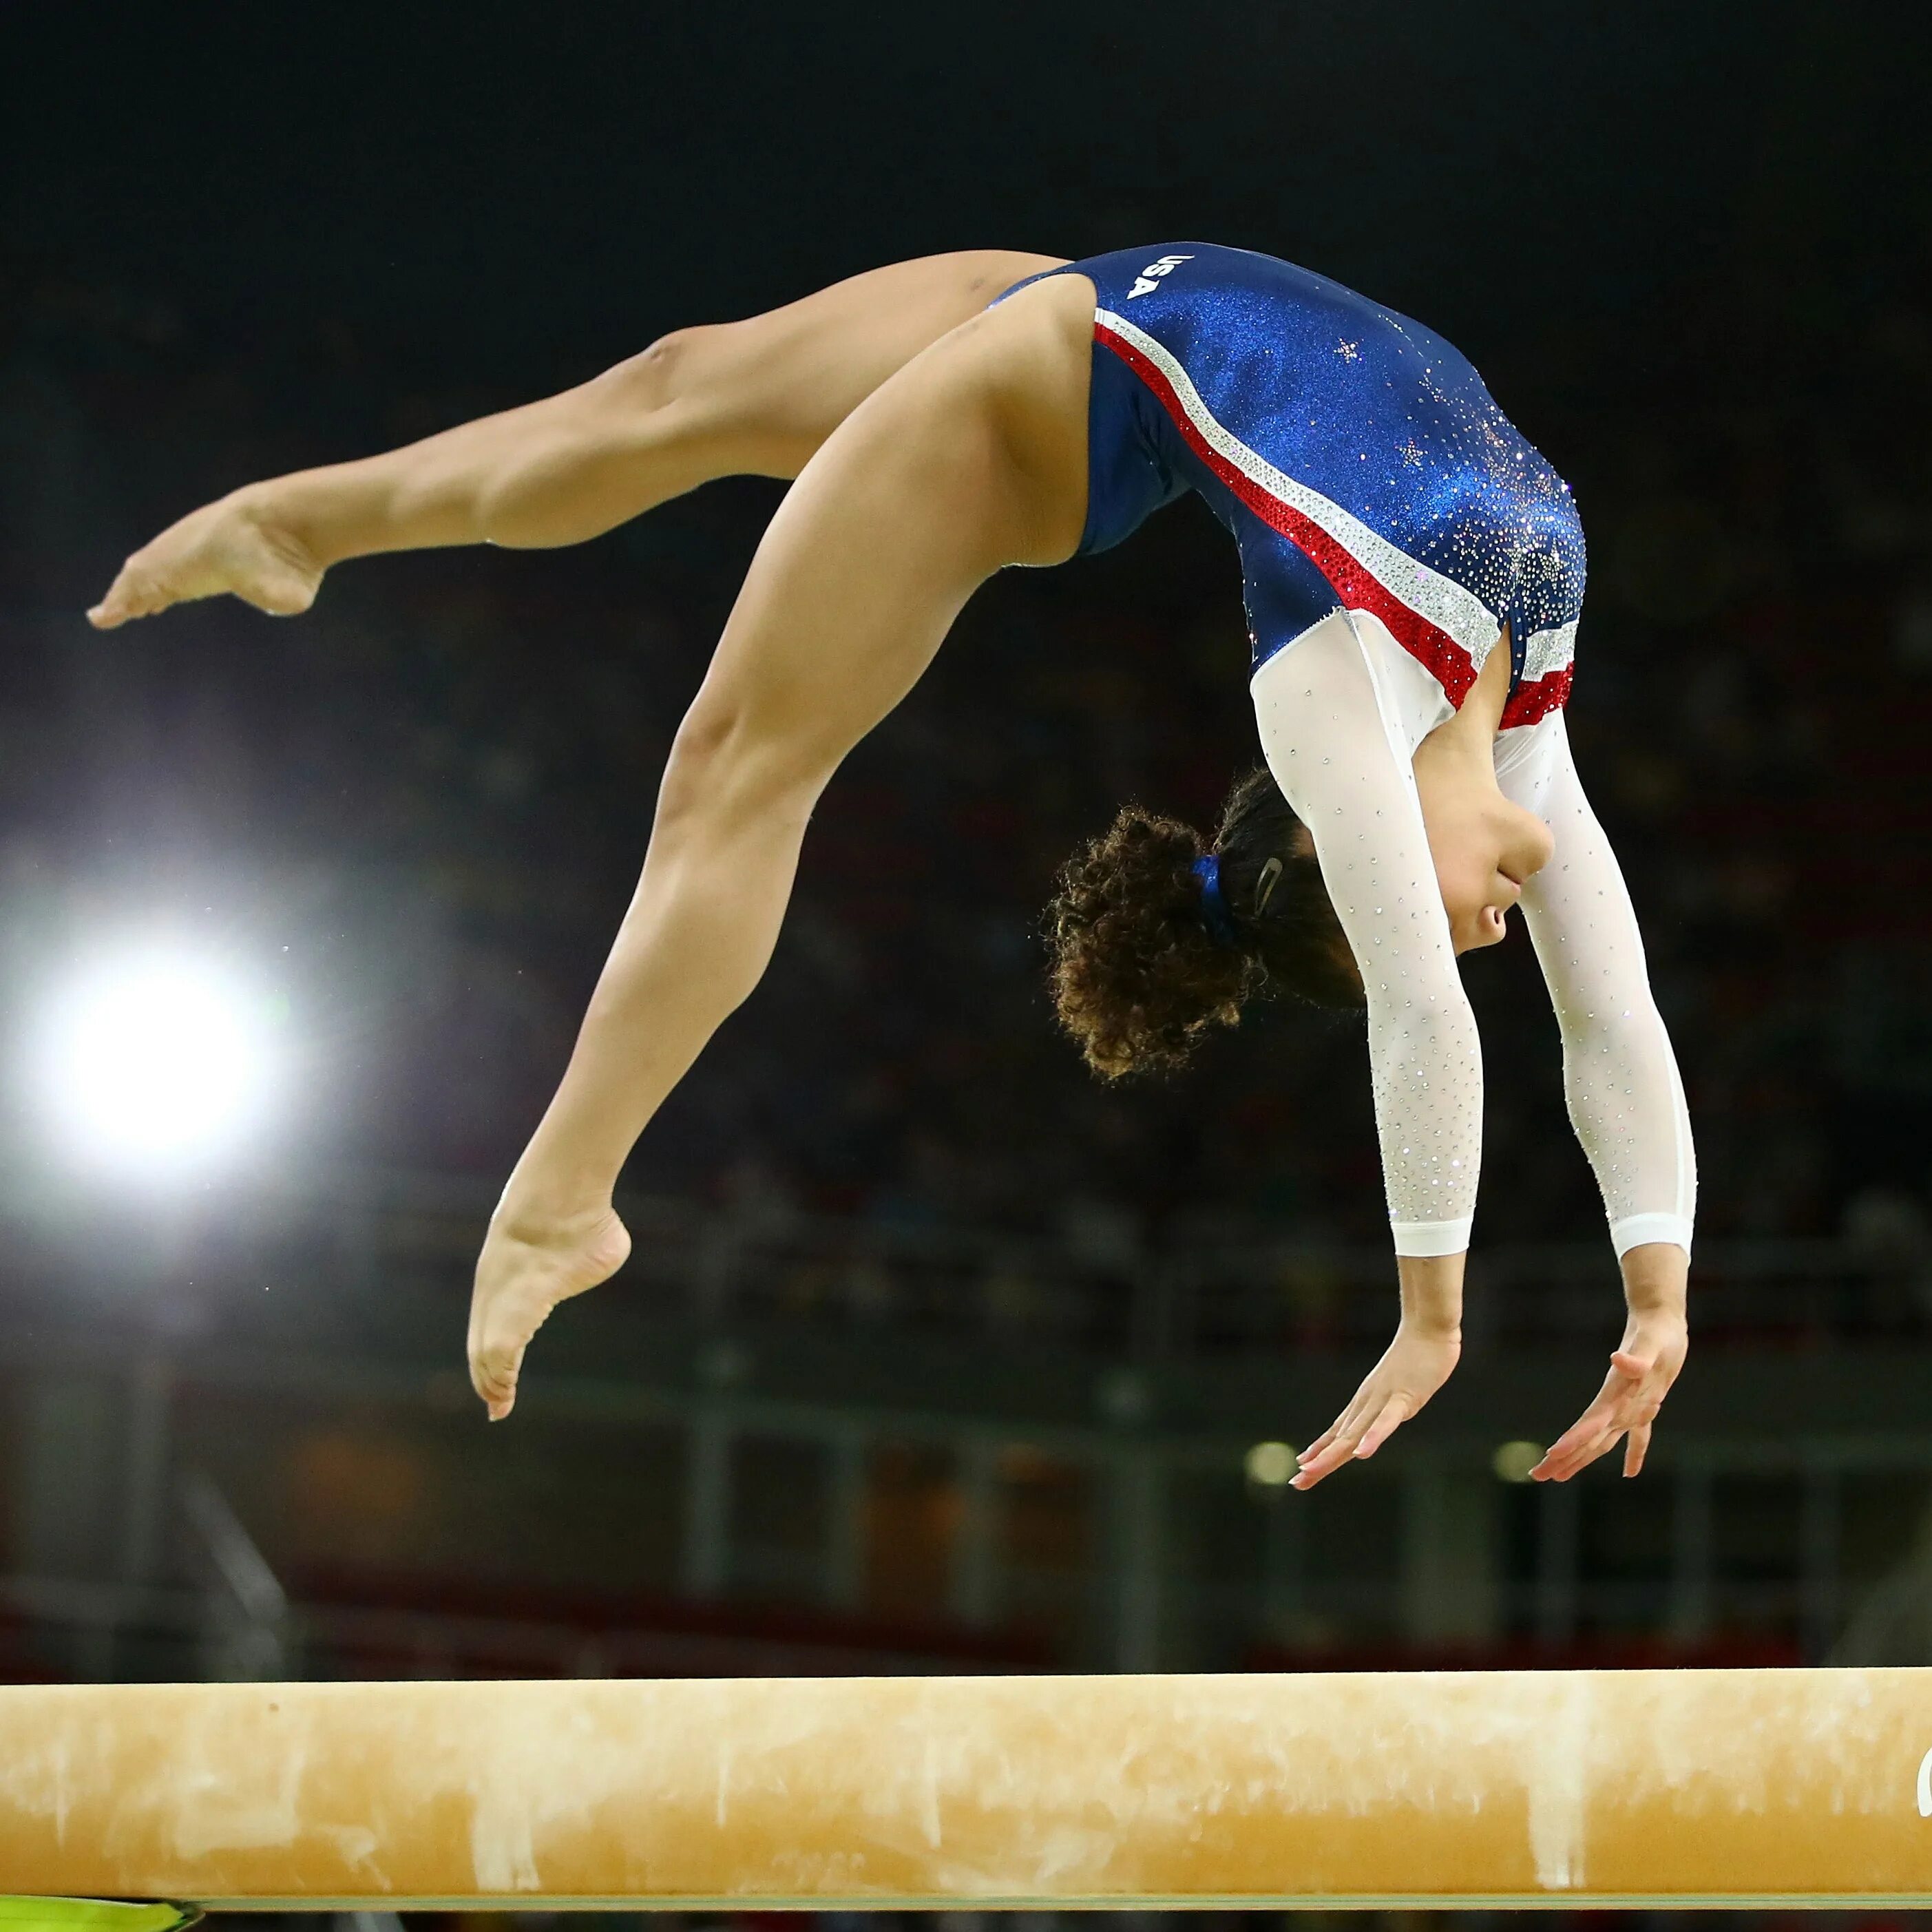 Gymnastics is the queen of all sports